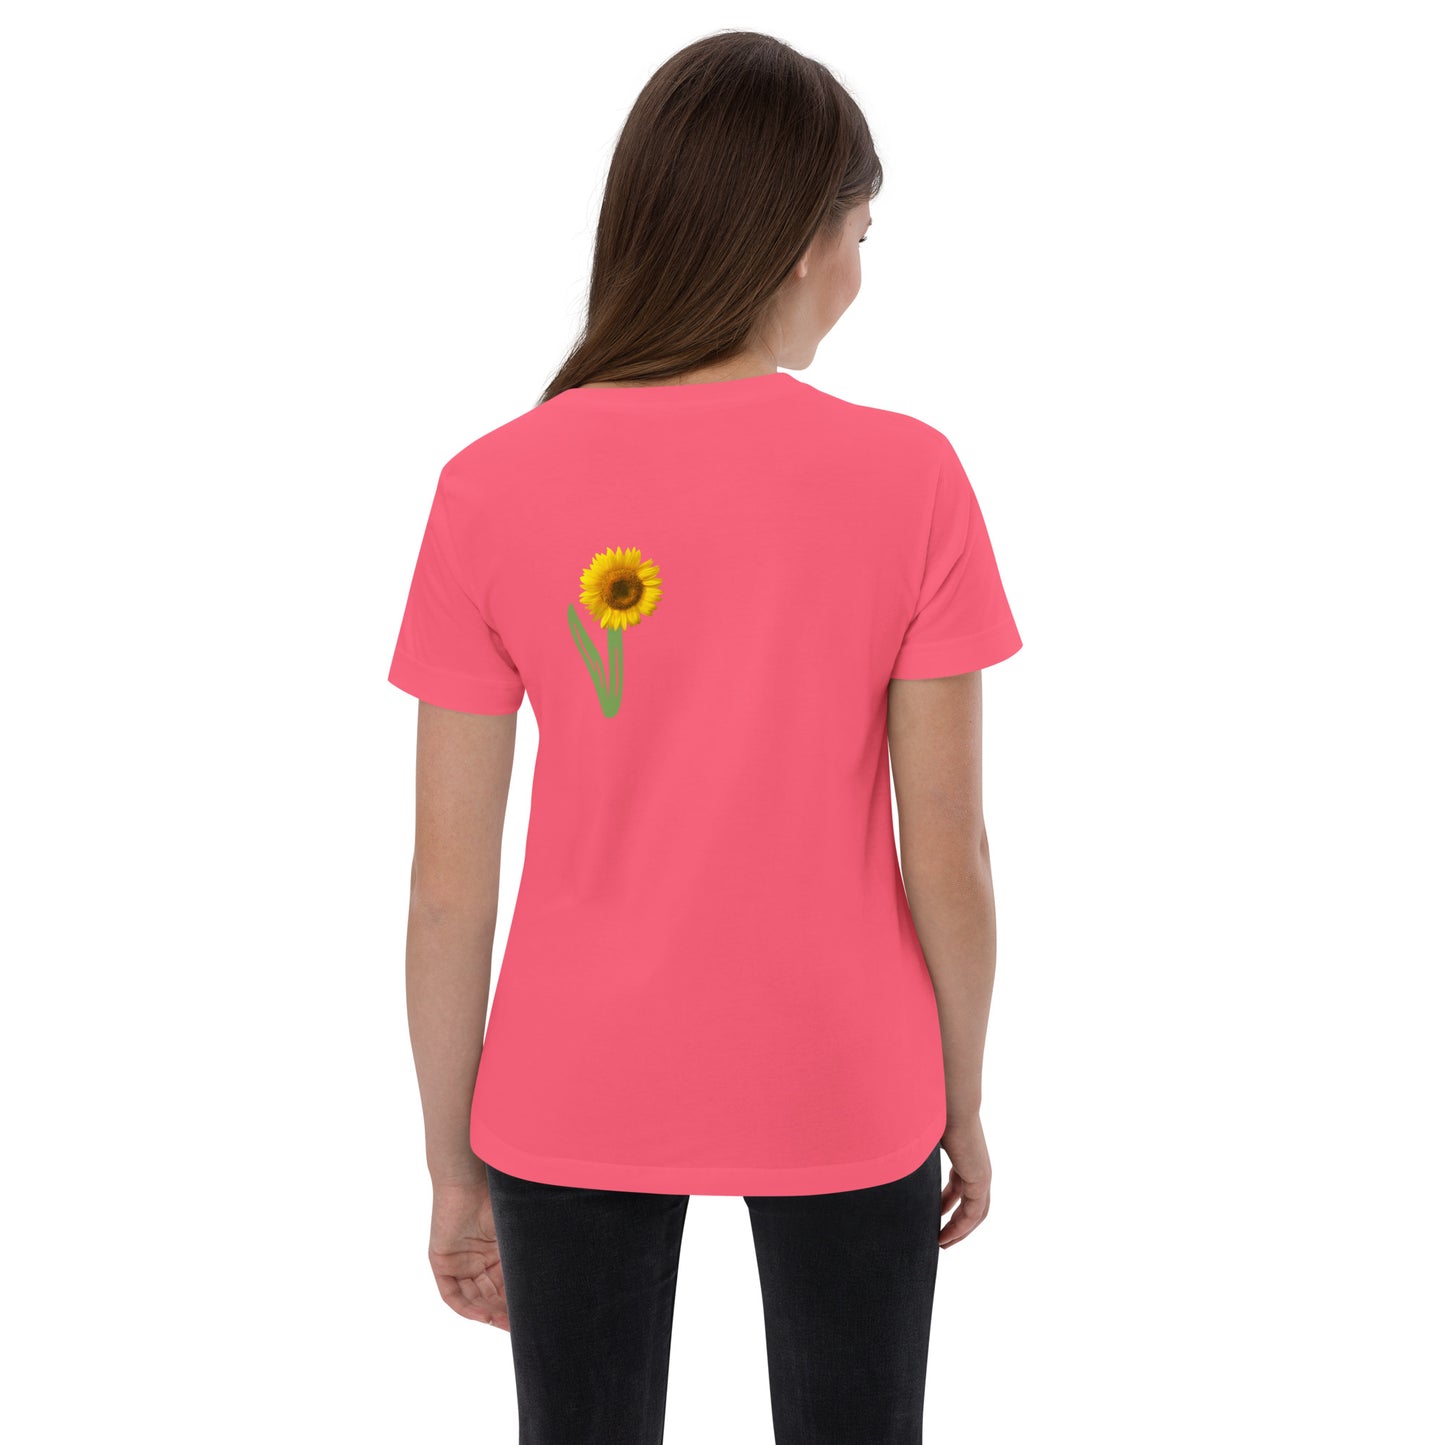 Youth jersey t-shirt-Sunny by Valerie